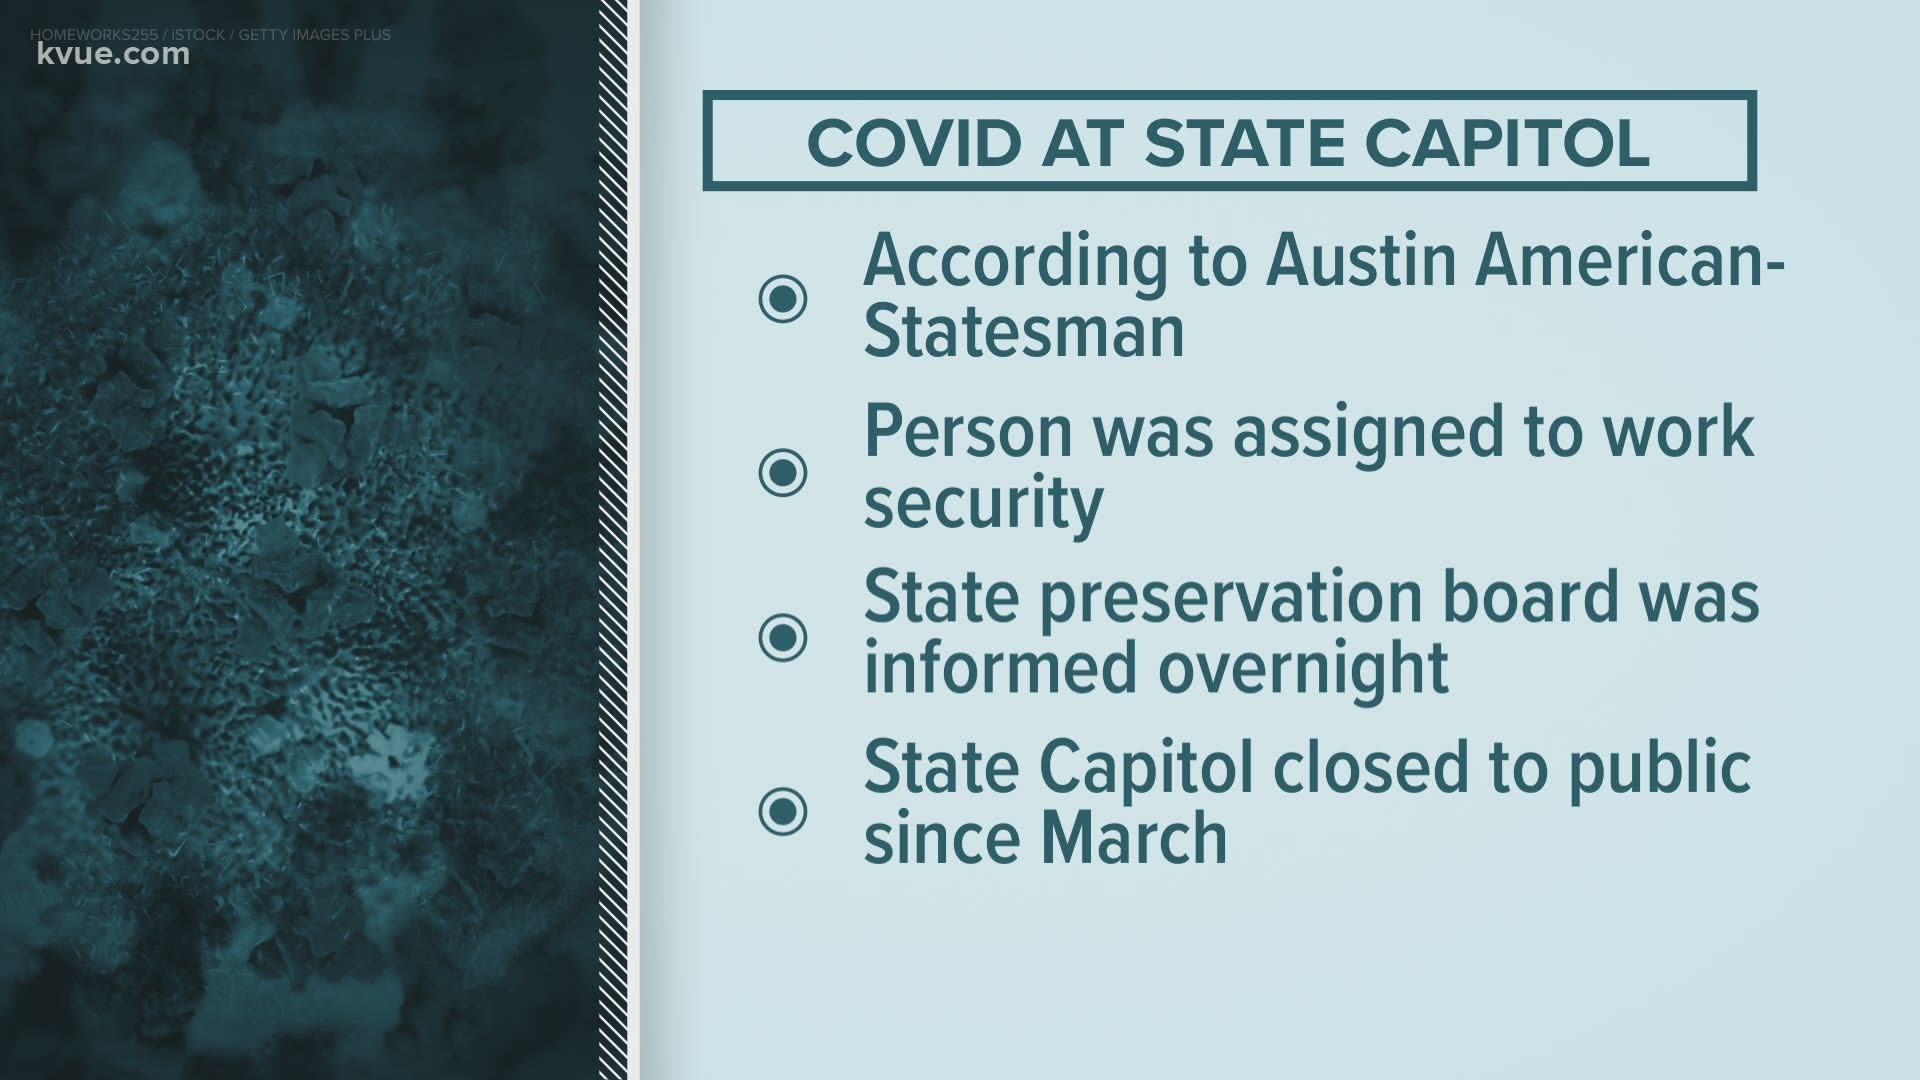 Reports state someone working security at the State Capitol during recent protests has tested positive for the coronavirus.